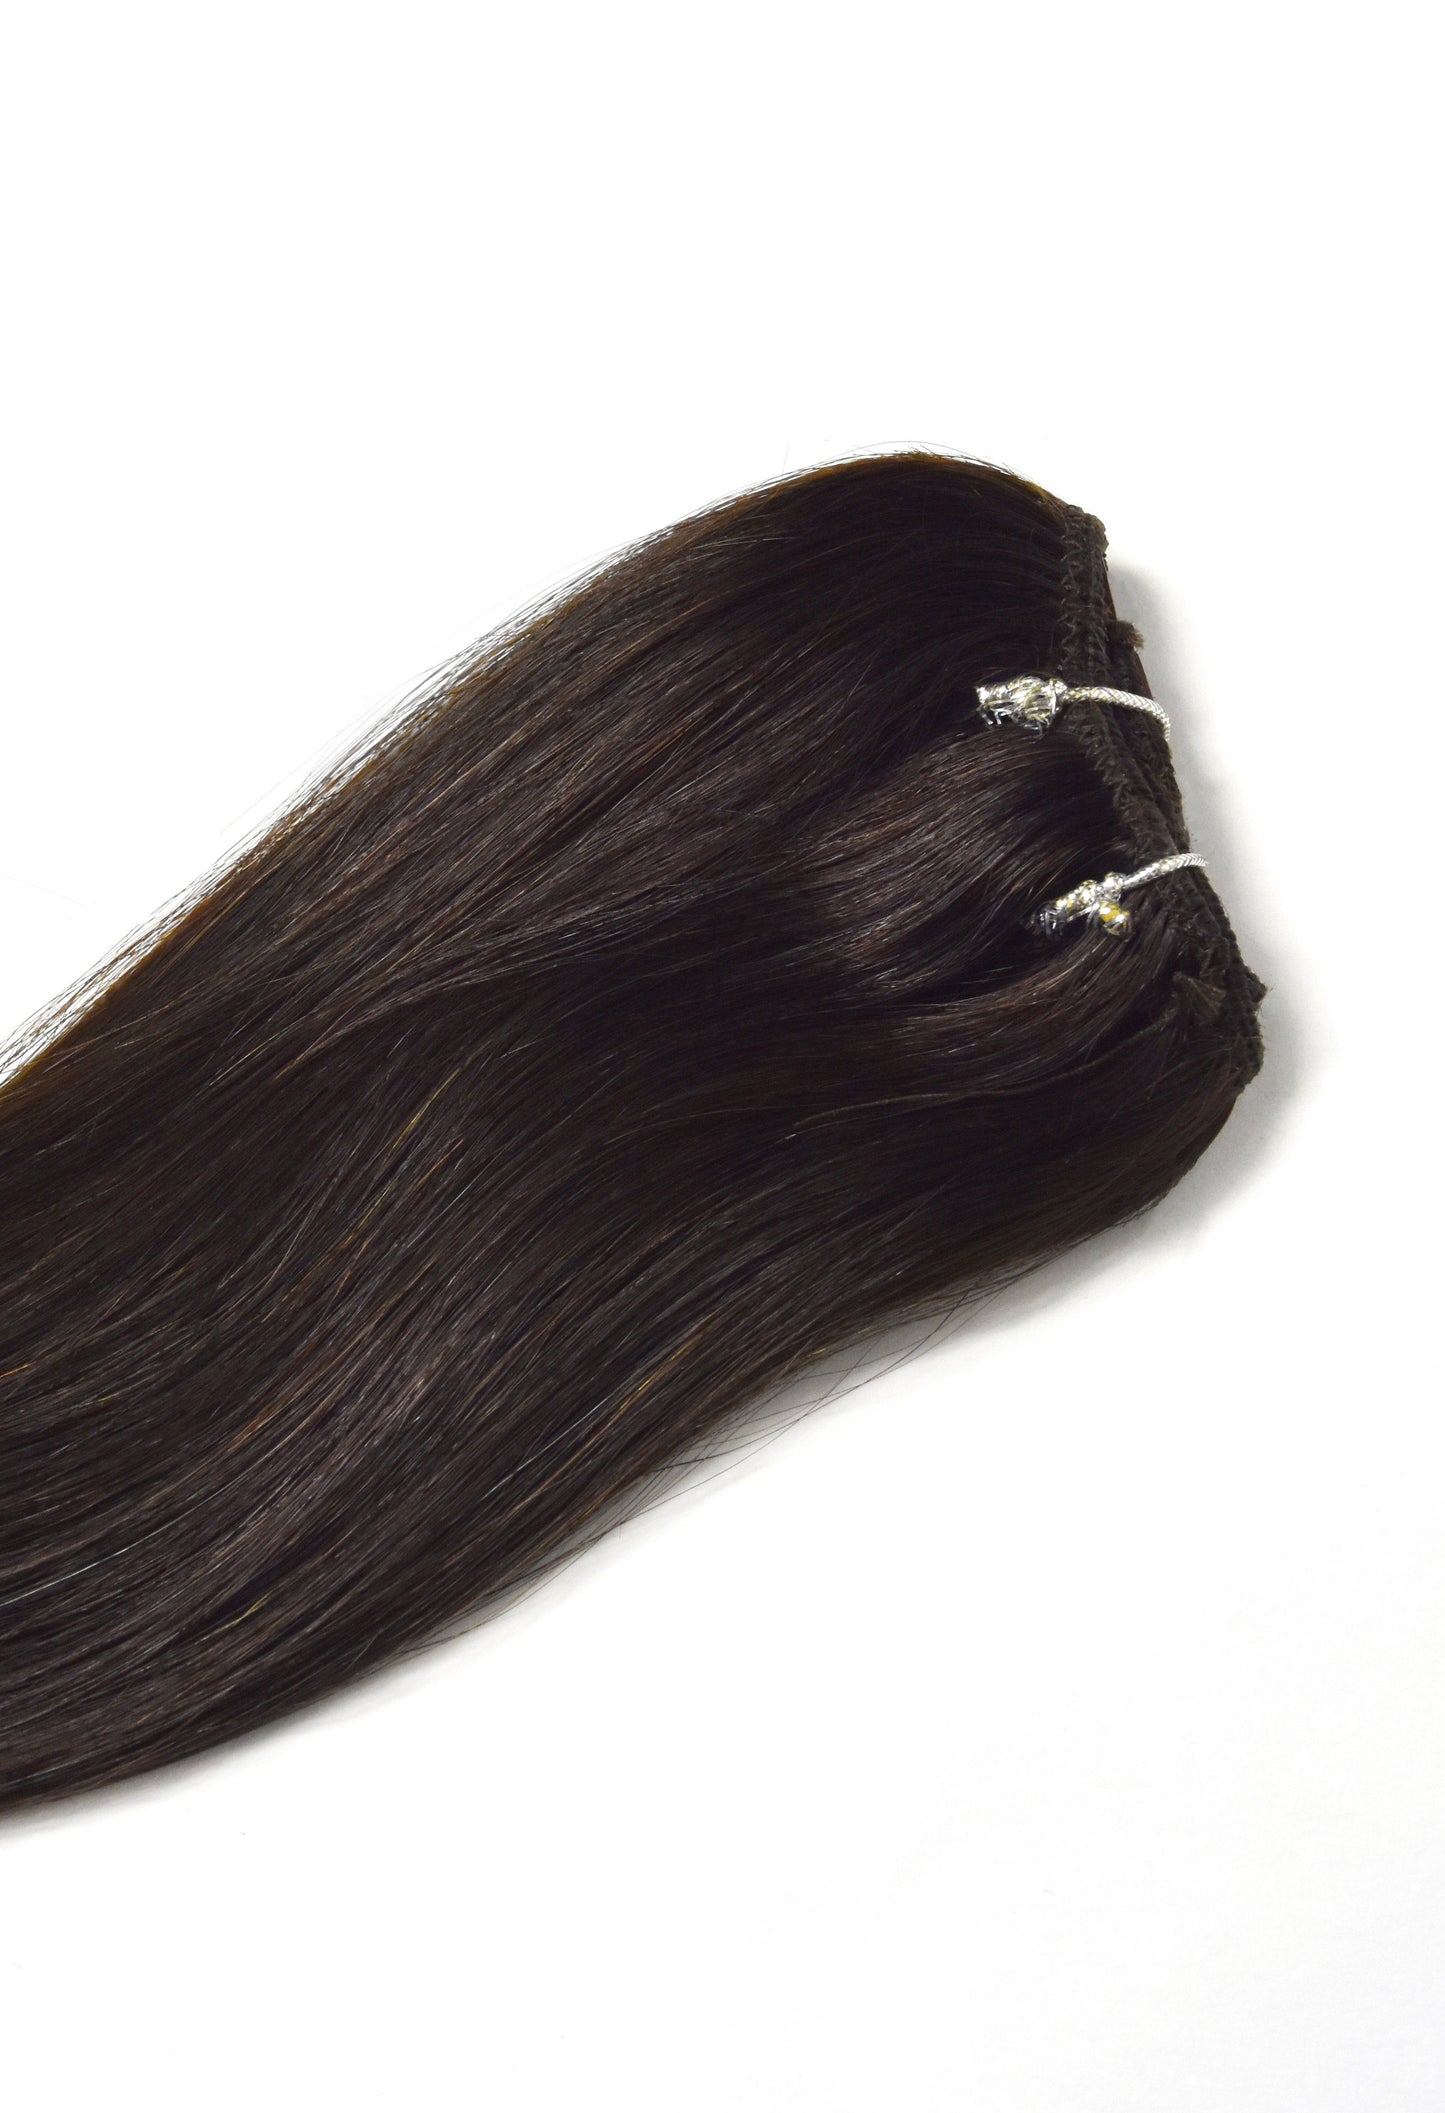 One Piece Top-up Remy Clip in Human Hair Extensions - Darkest Brown (#2) One Piece Clip In Hair Extensions cliphair 